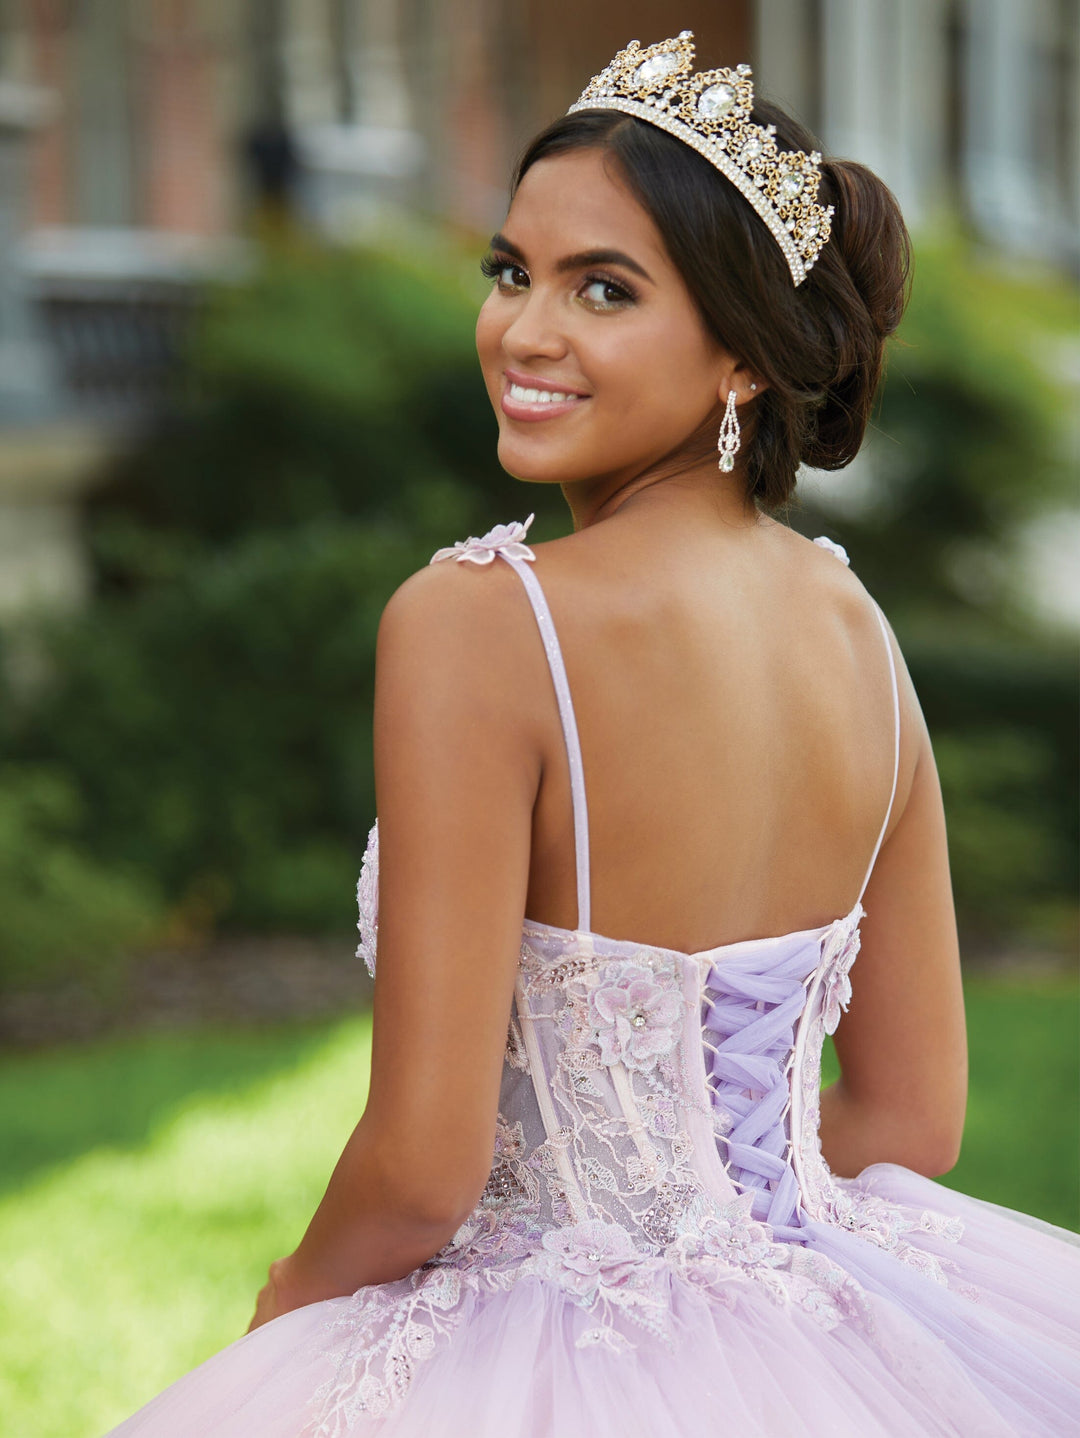 Lace Sheer Corset Quinceanera Dress by Fiesta Gowns 56469